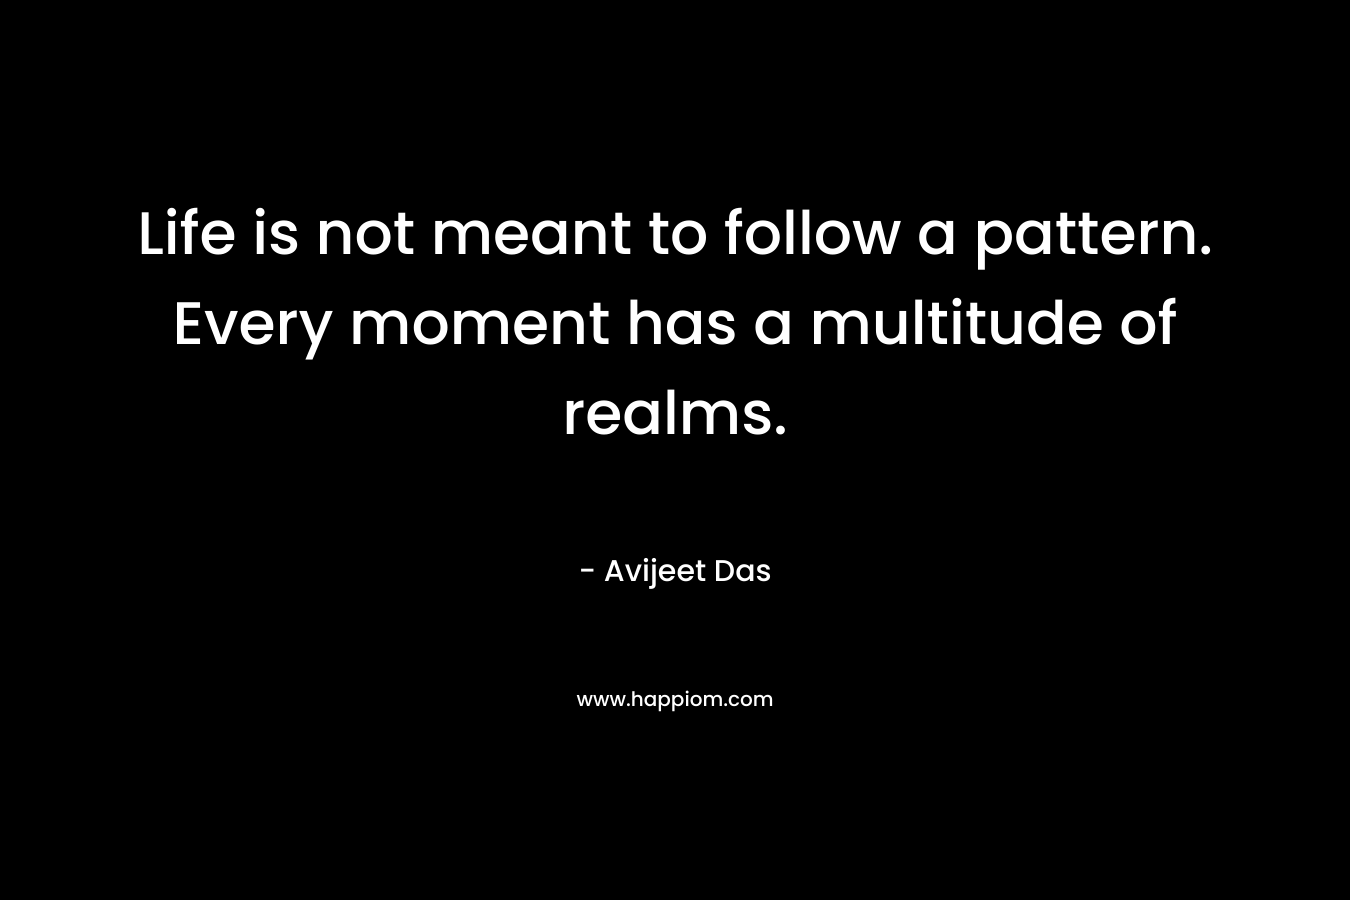 Life is not meant to follow a pattern. Every moment has a multitude of realms. – Avijeet Das